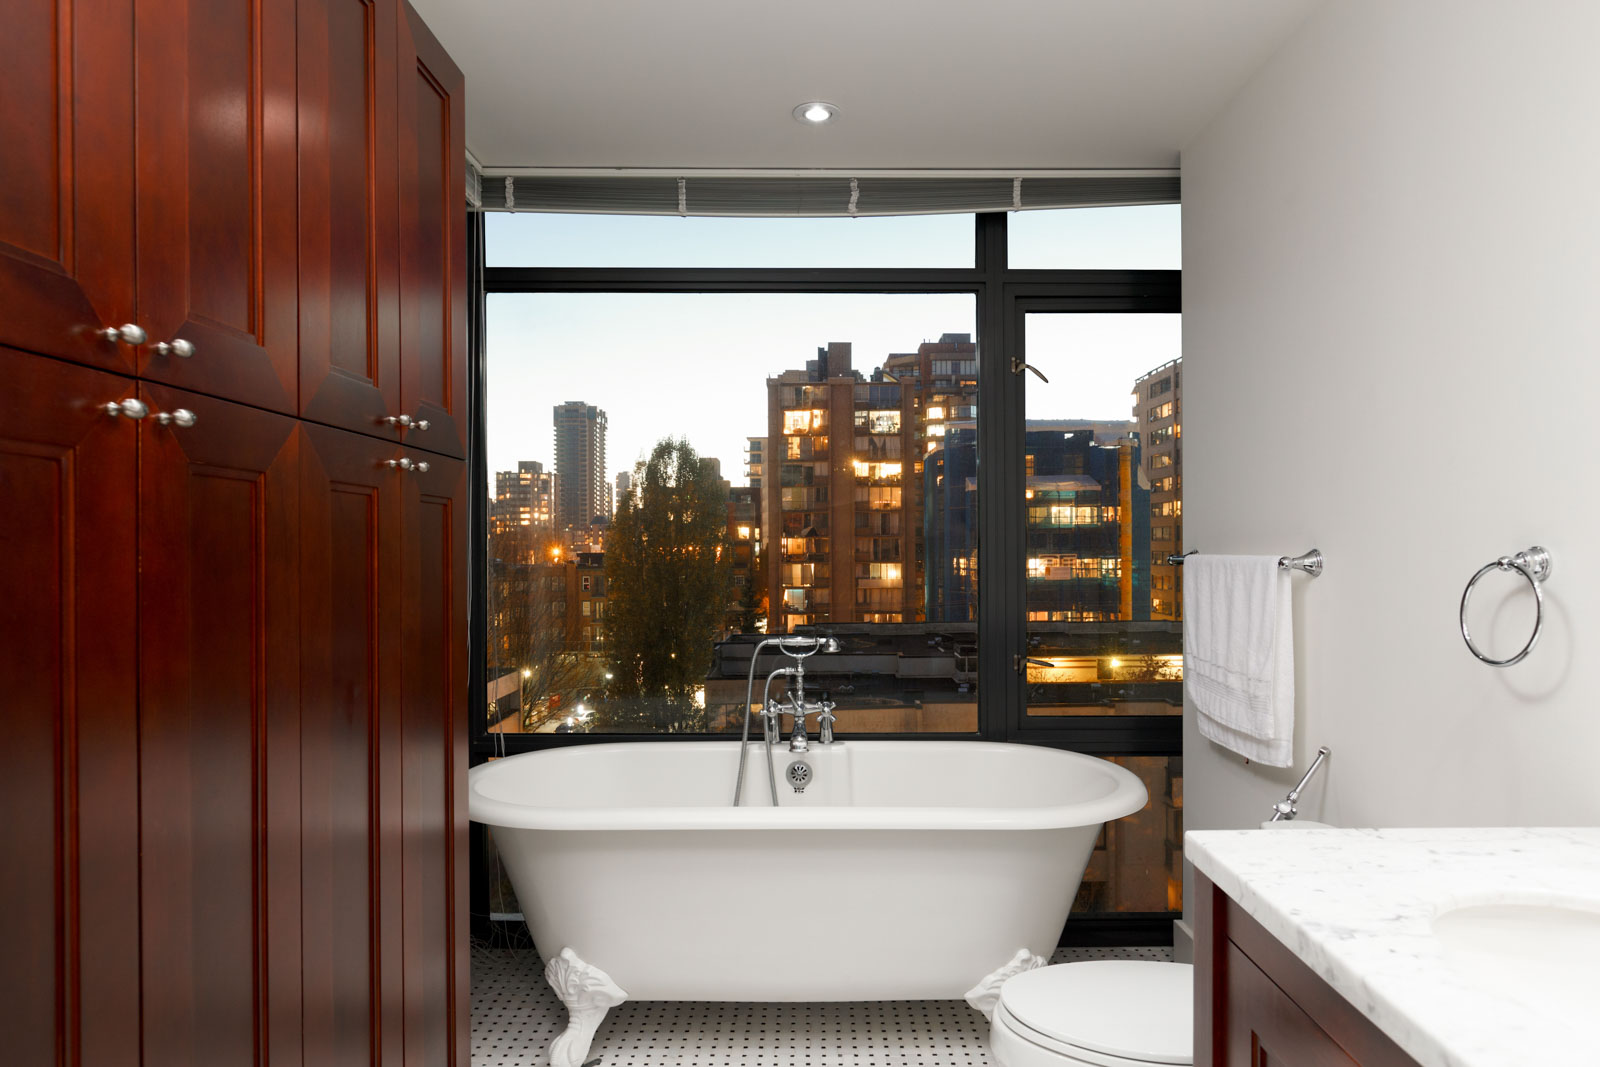 standalone bath tub against the window of bathroom with wood cabinets and walls on left in lumiere condo in west end vancouver